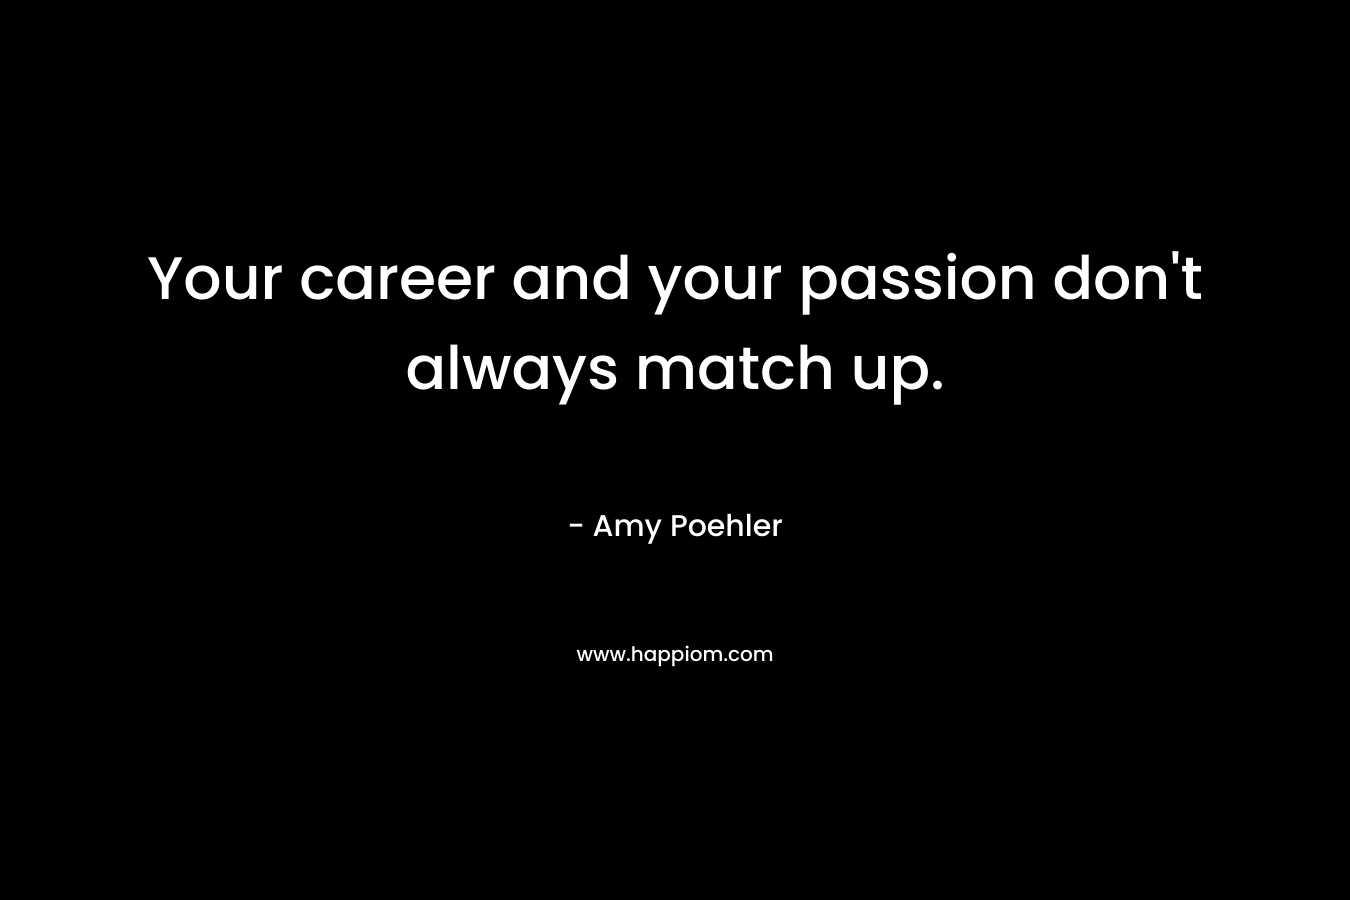 Your career and your passion don’t always match up. – Amy Poehler